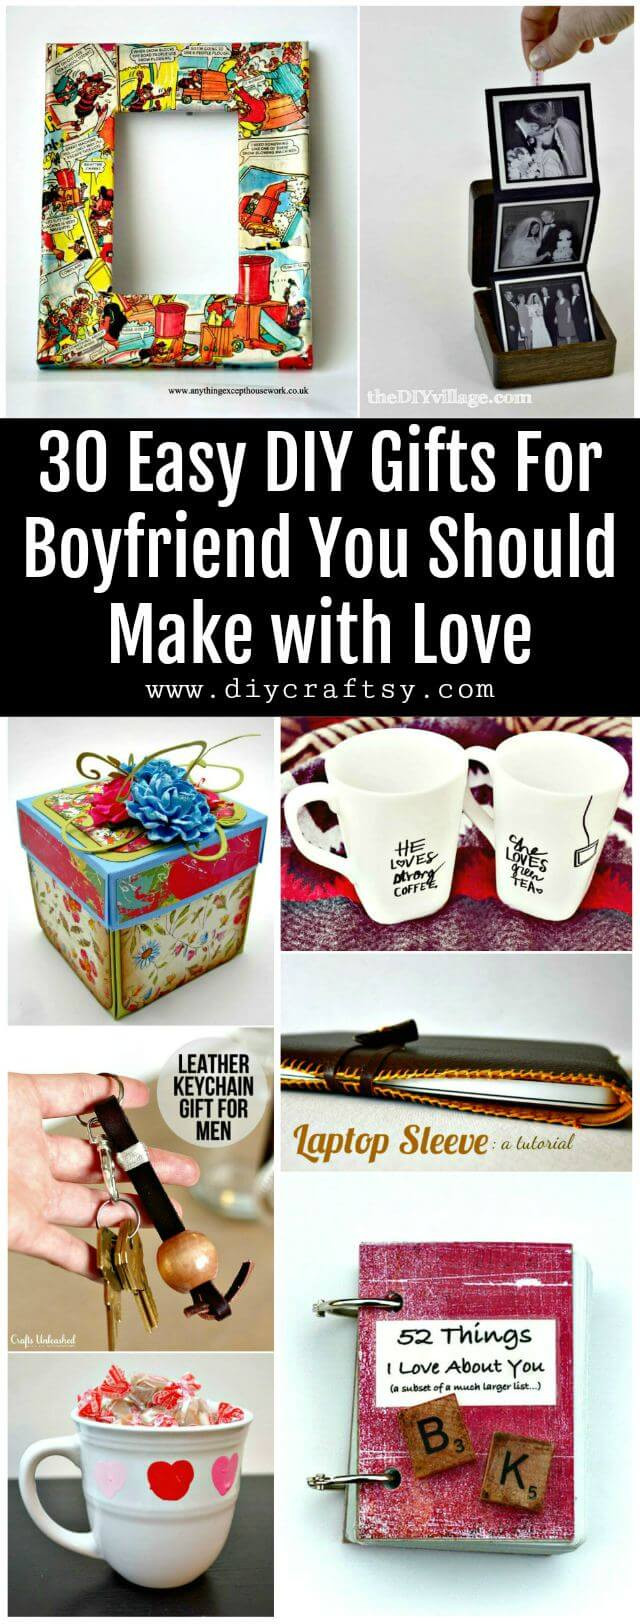 DIY Gift For Boyfriend
 30 Easy DIY Gifts For Boyfriend You Should Make with Love